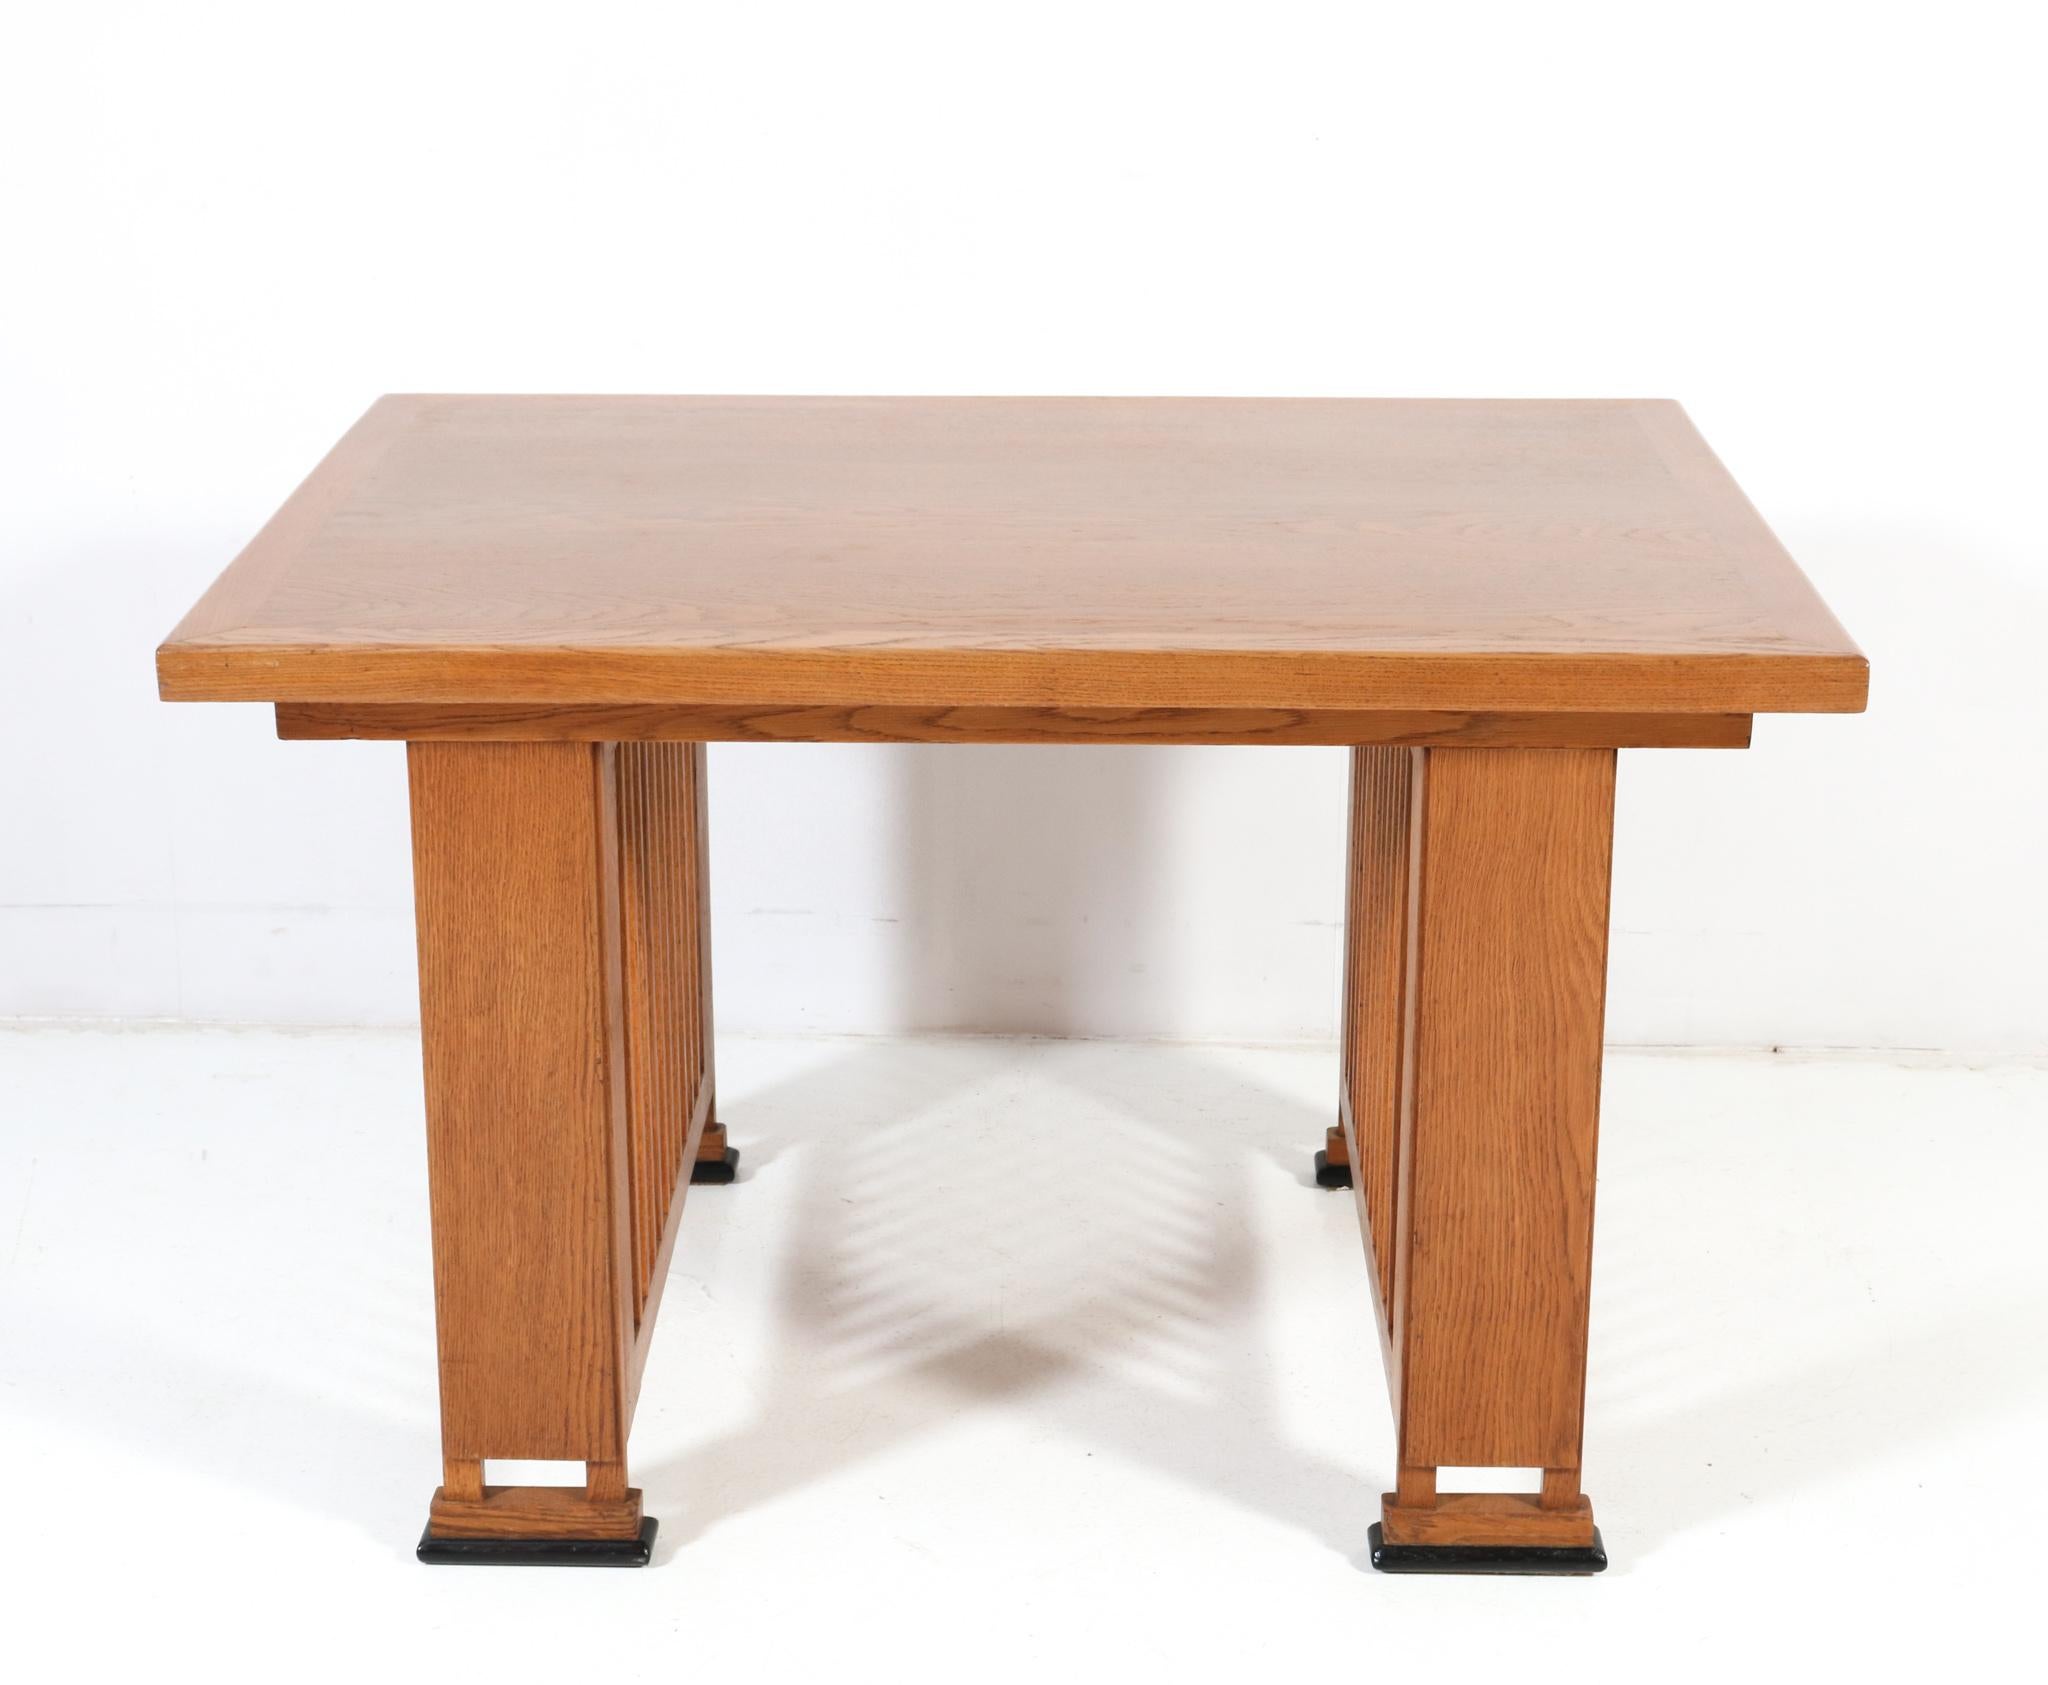 Oak Art Deco Modernist Writing Table or Dining Table by Architect Caspers, 1920s In Good Condition For Sale In Amsterdam, NL